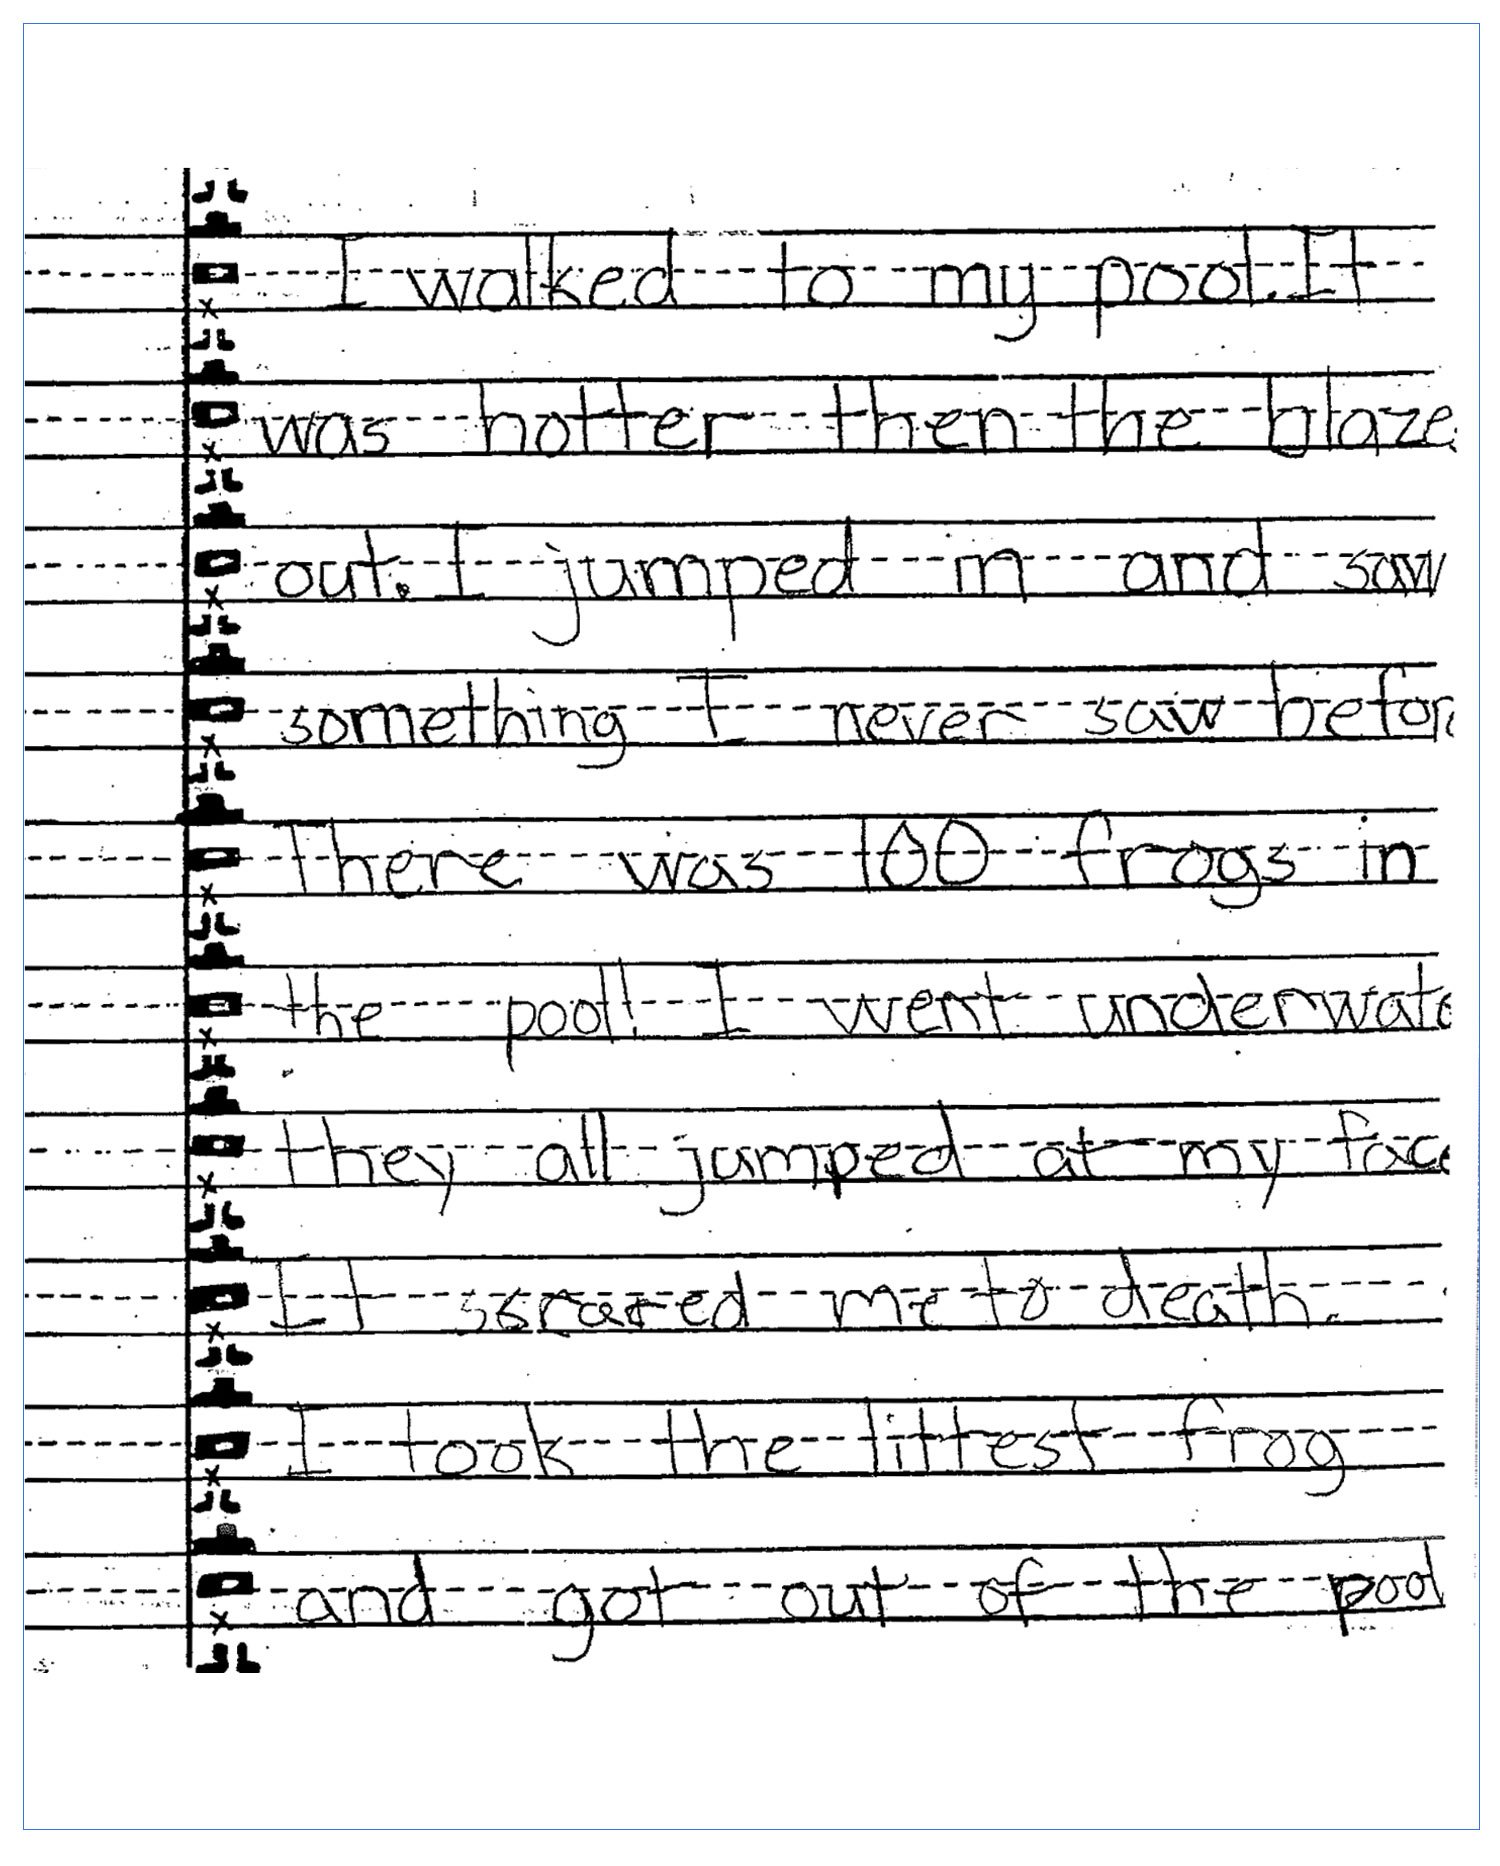 Narrative Writing Sample- Grade 4- Frogs in the Pool